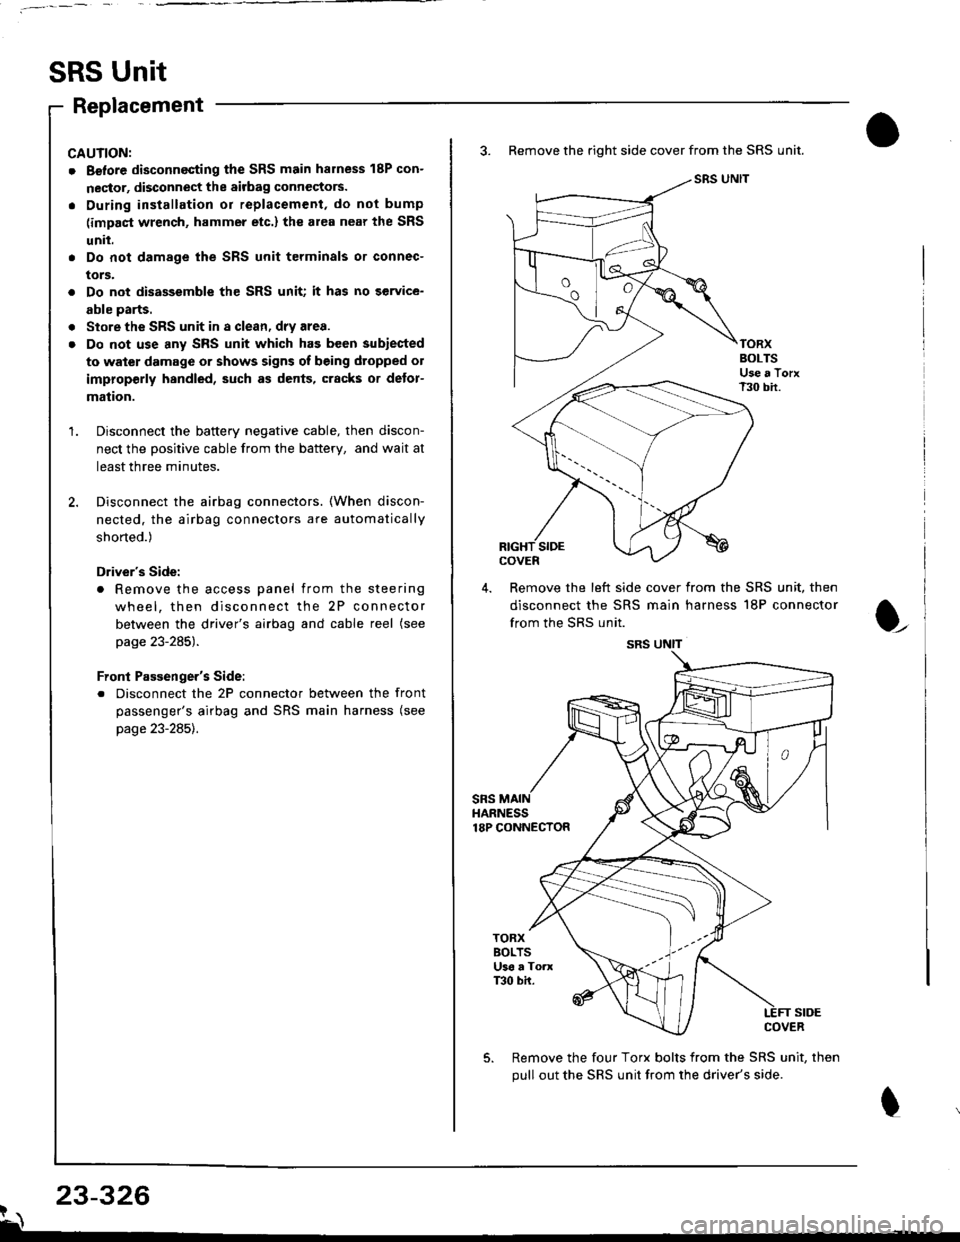 HONDA INTEGRA 1998 4.G Workshop Manual SRS Unit
Replacement
CAUNON:
. Betore disconnecting the SRS main harness 18P con-
nector, disconnect the aitbag connectors.
. During installation or replacement, do not bump
(impact wrench, hammer etc